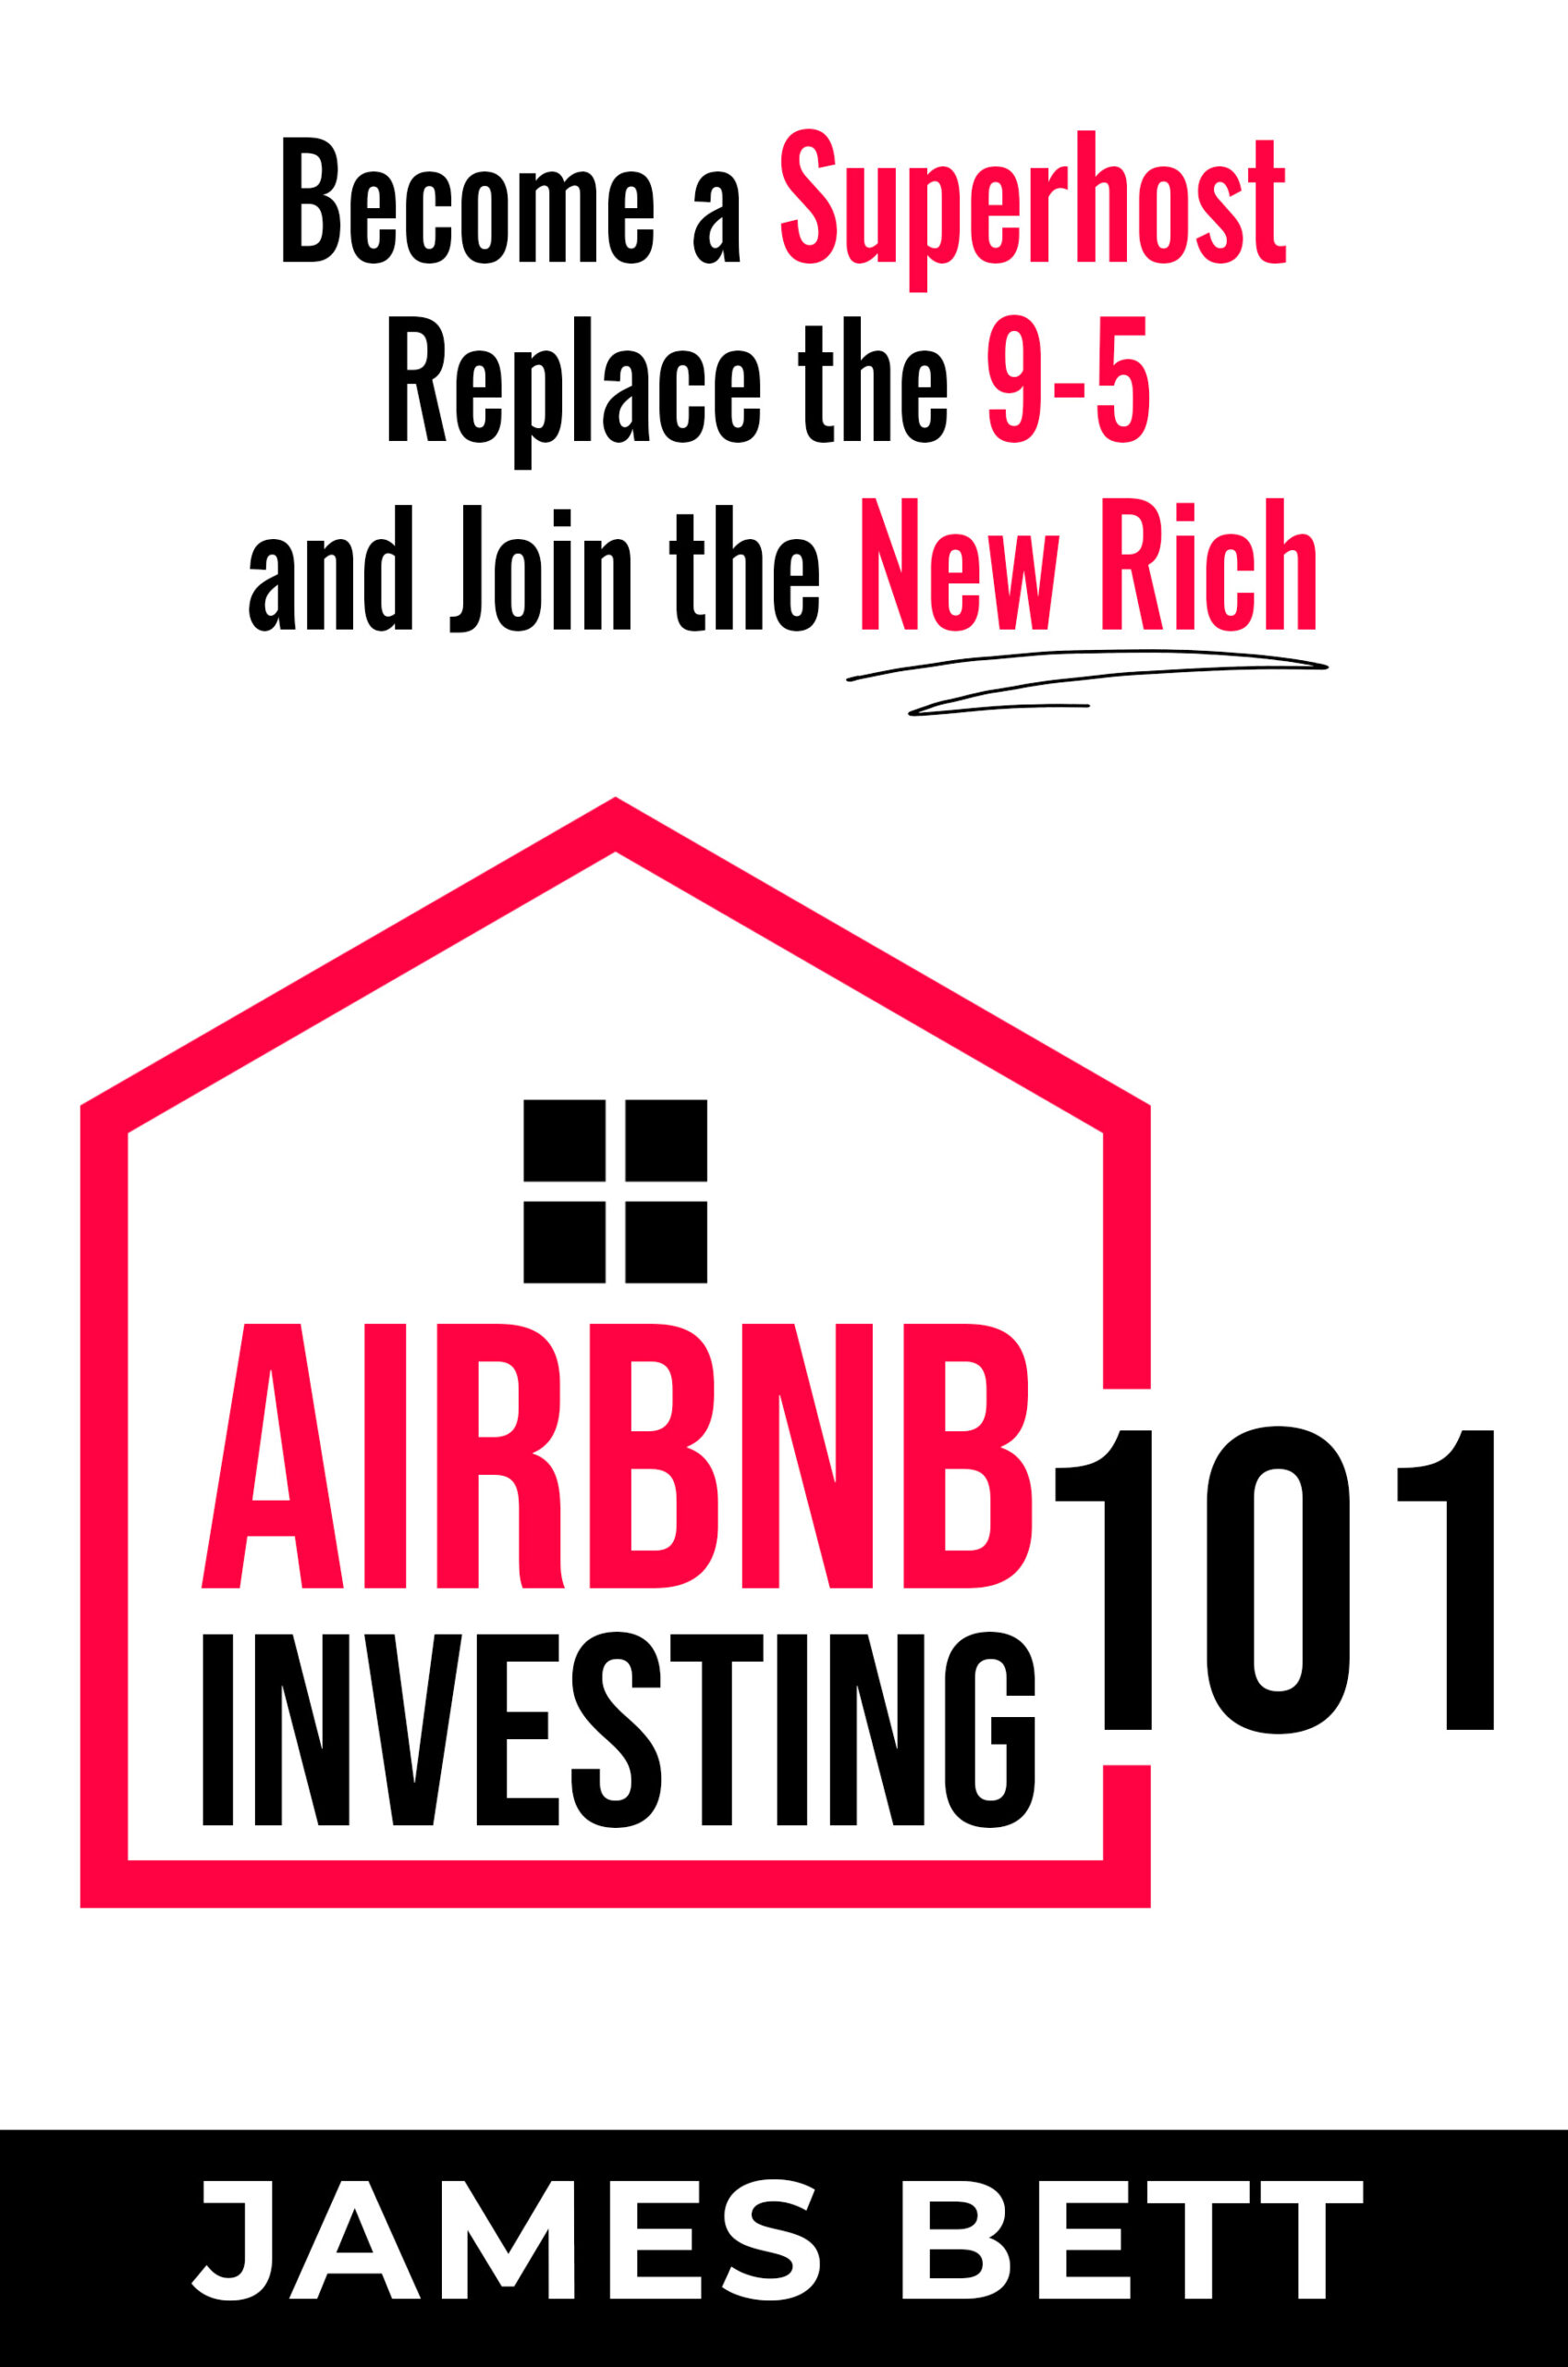 Airbnb Investing superhost business-black